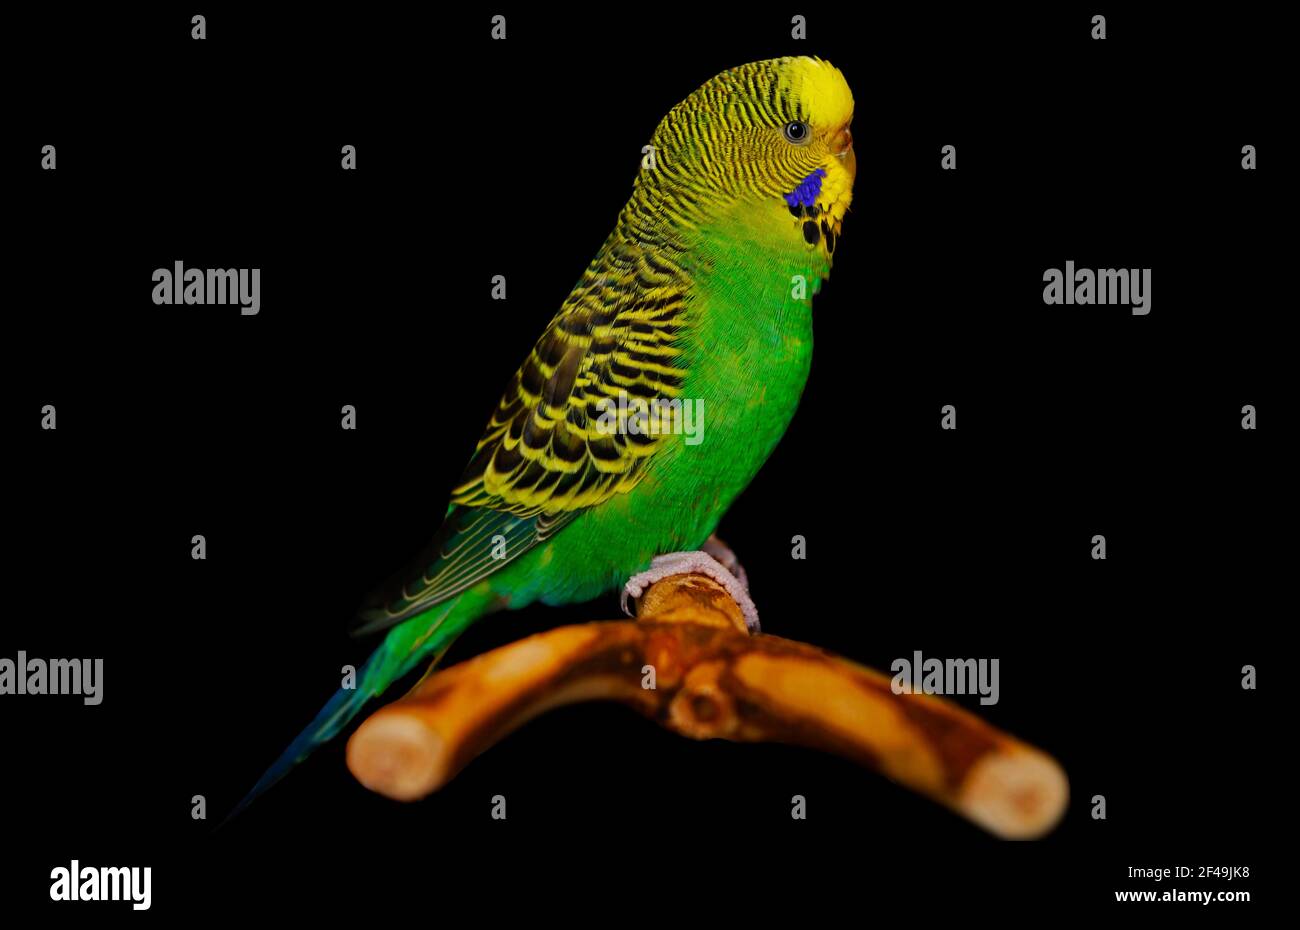 A green budgericar (Melopsittacus undulatus) standing on a perch, isolated in black background Stock Photo